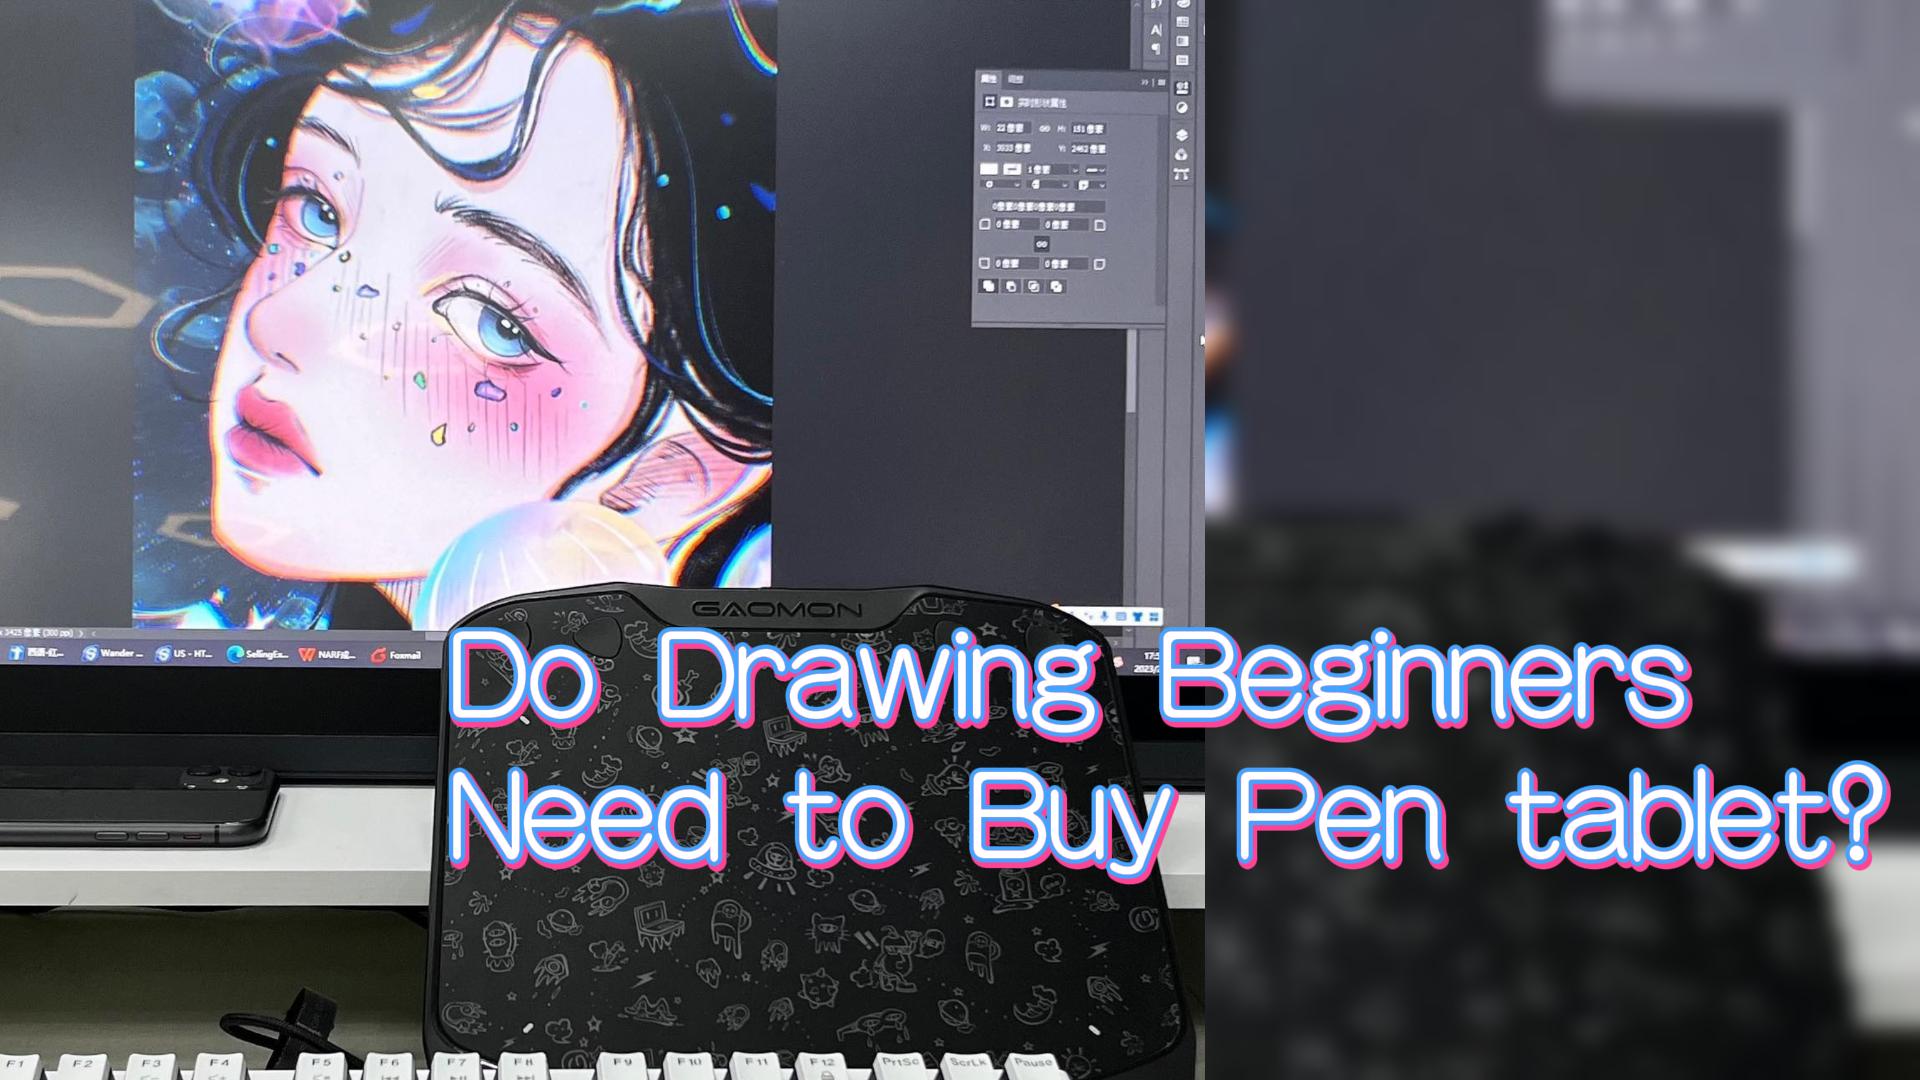 Do Drawing Beginners Need to Buy a Pen Tablet?